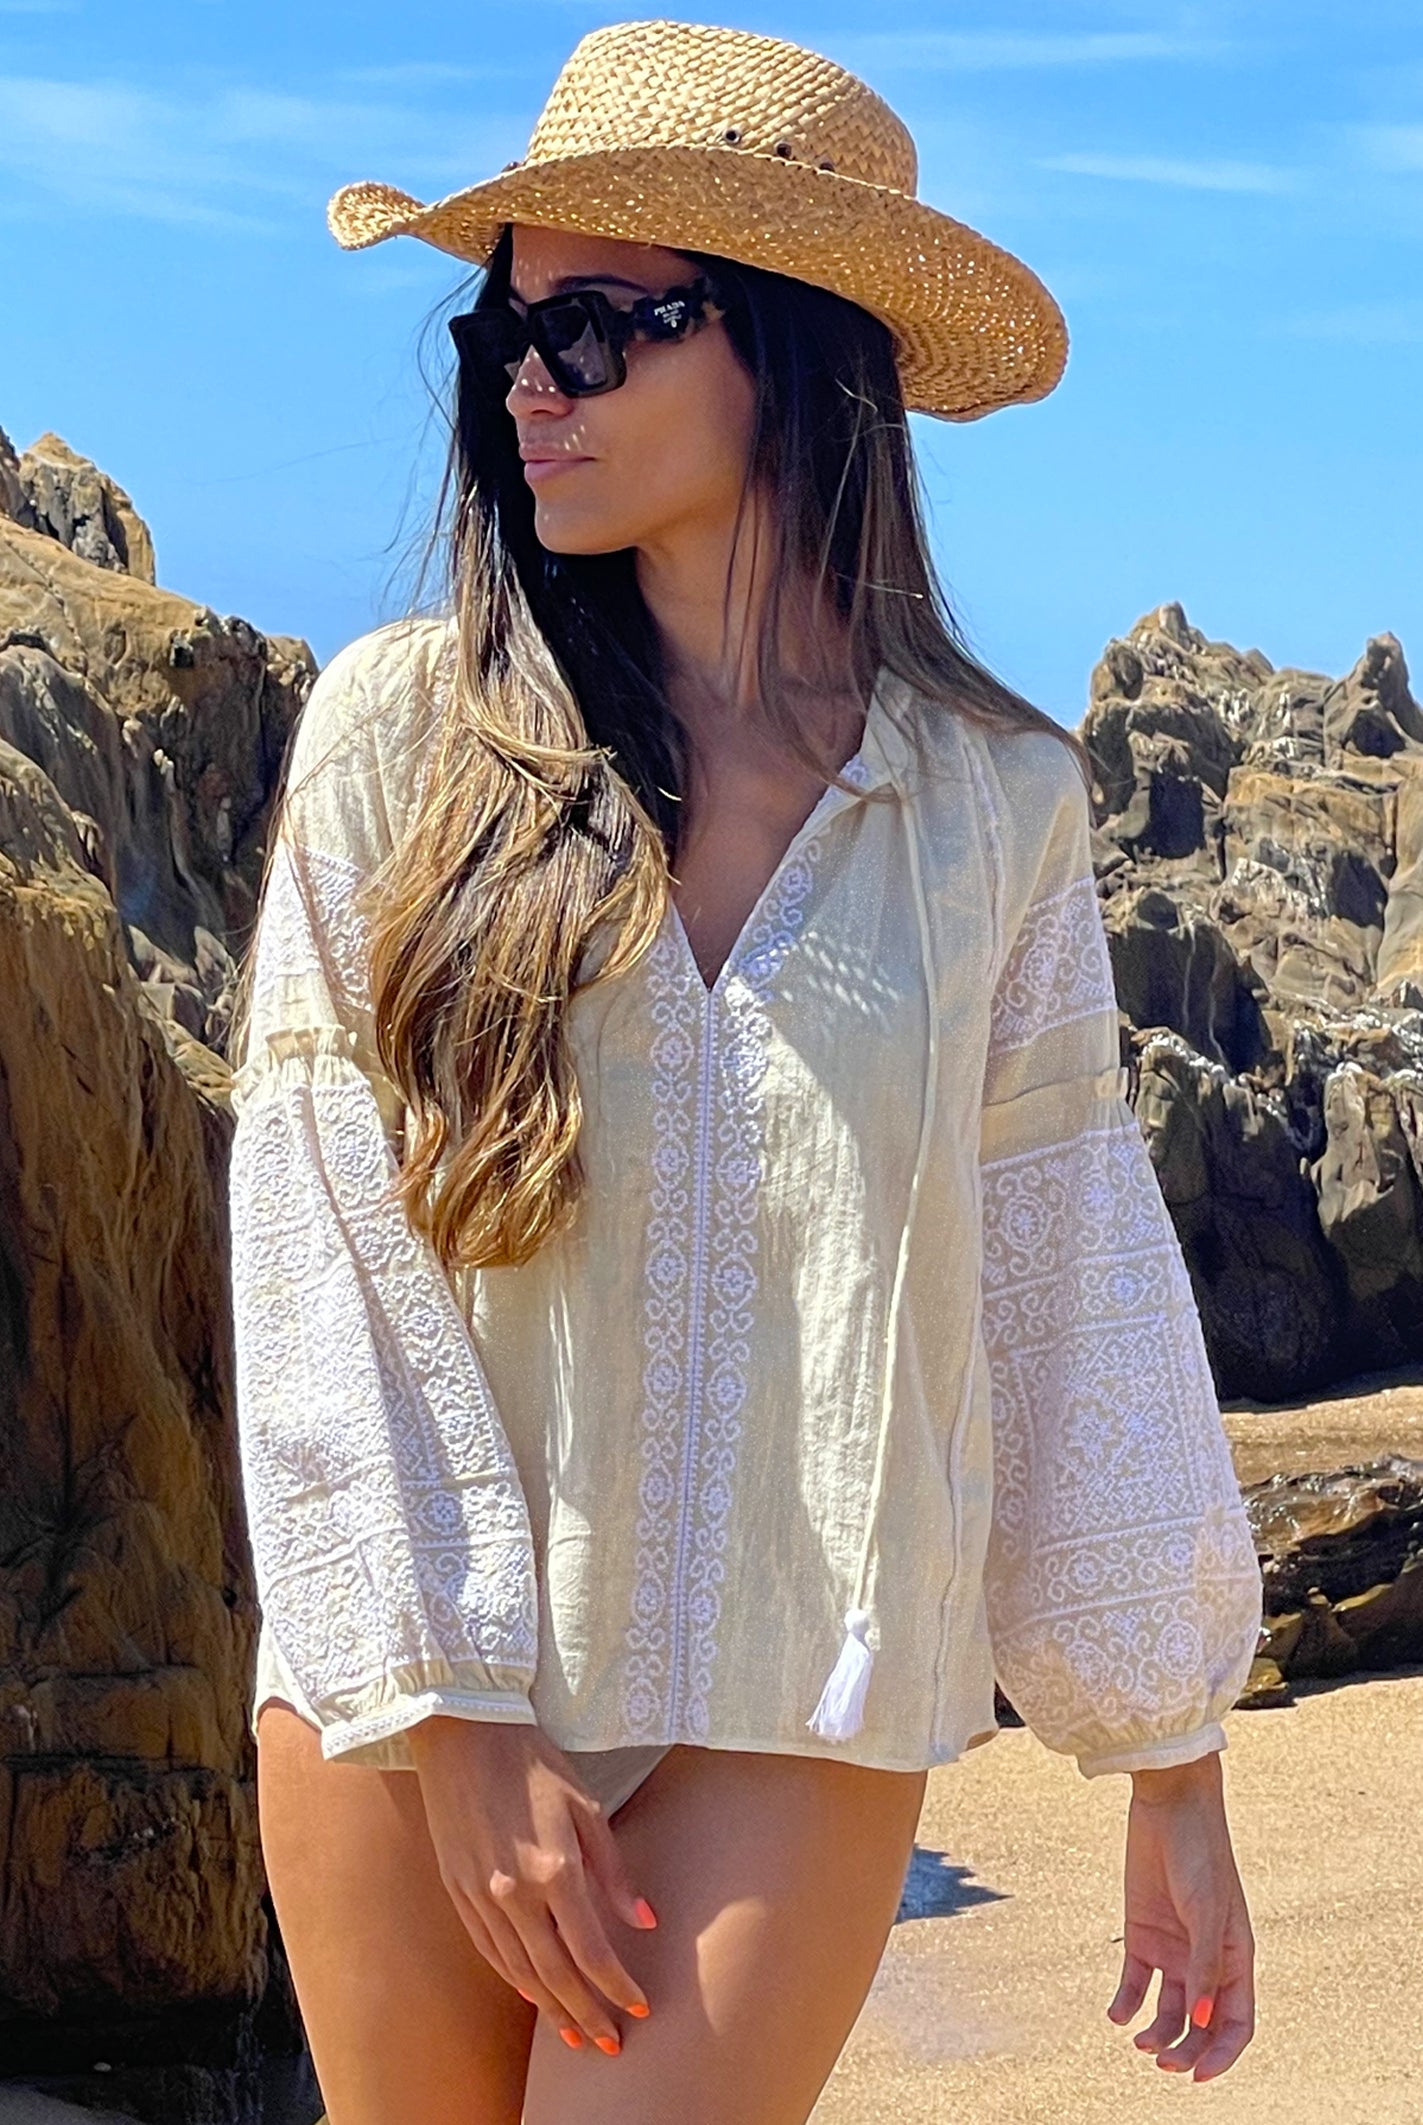 A model on a beach wearing the Rose and Rose gold lurex Capri embroidered top, straw cowboy hat and sunglasses.